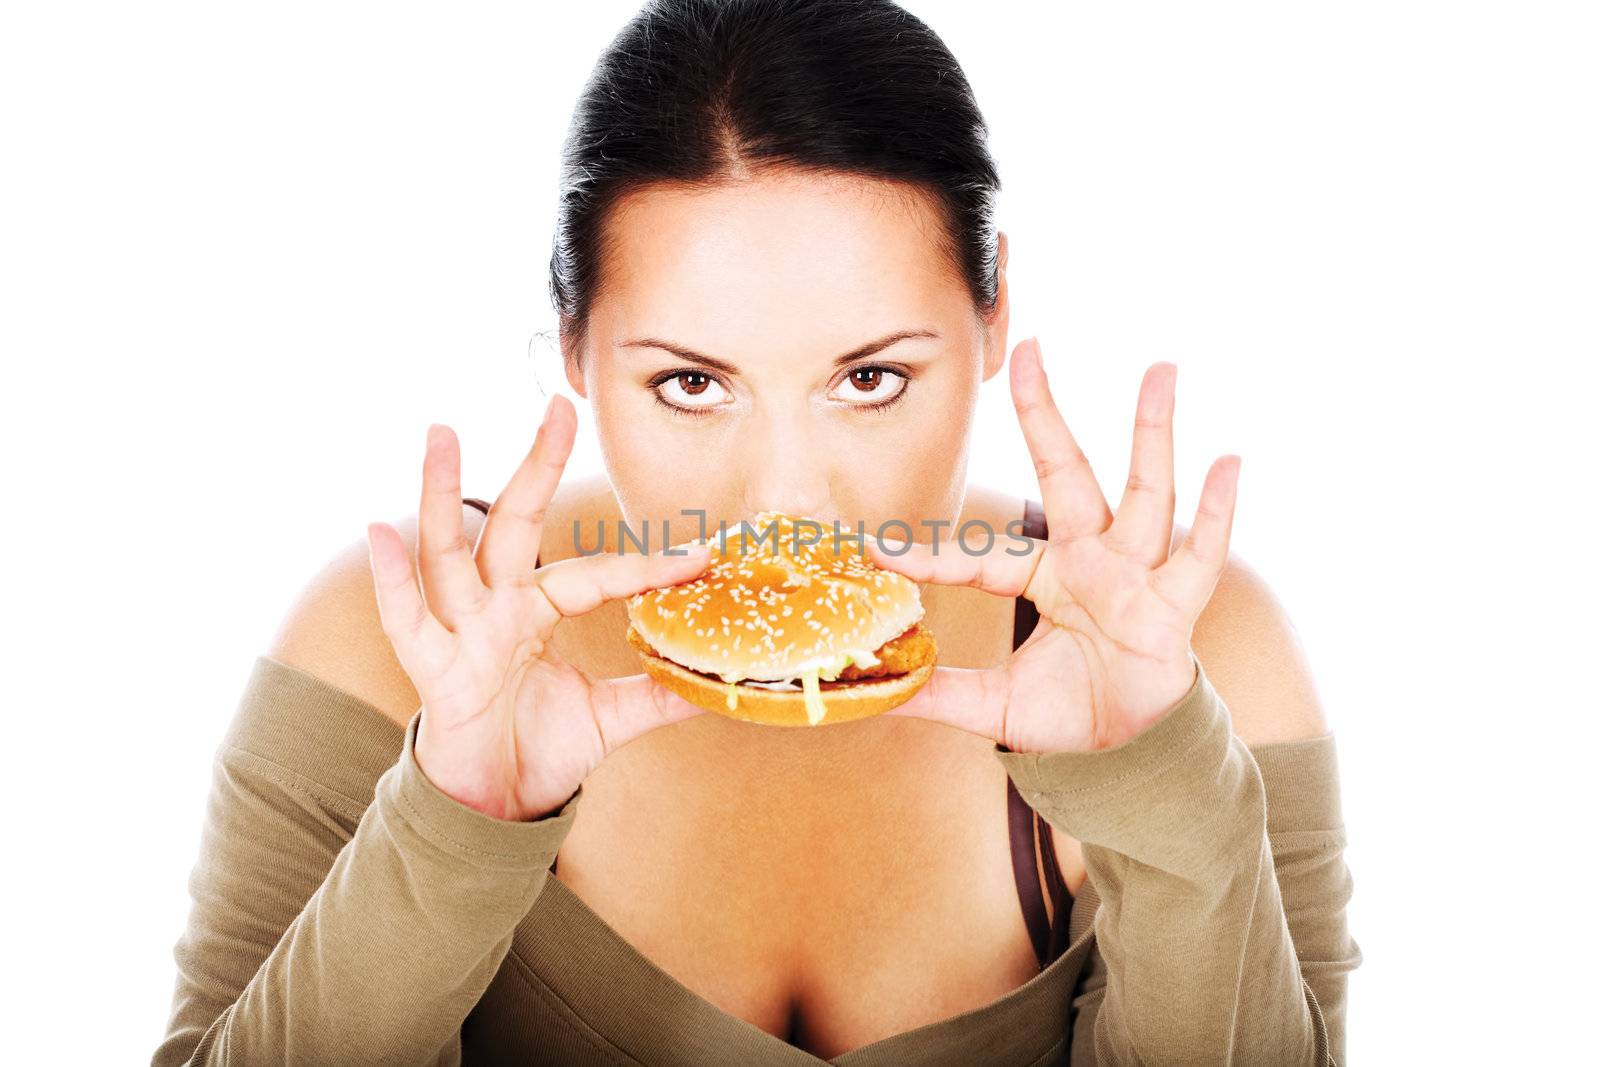 Cute chubby eating a hamburger, isolated on white